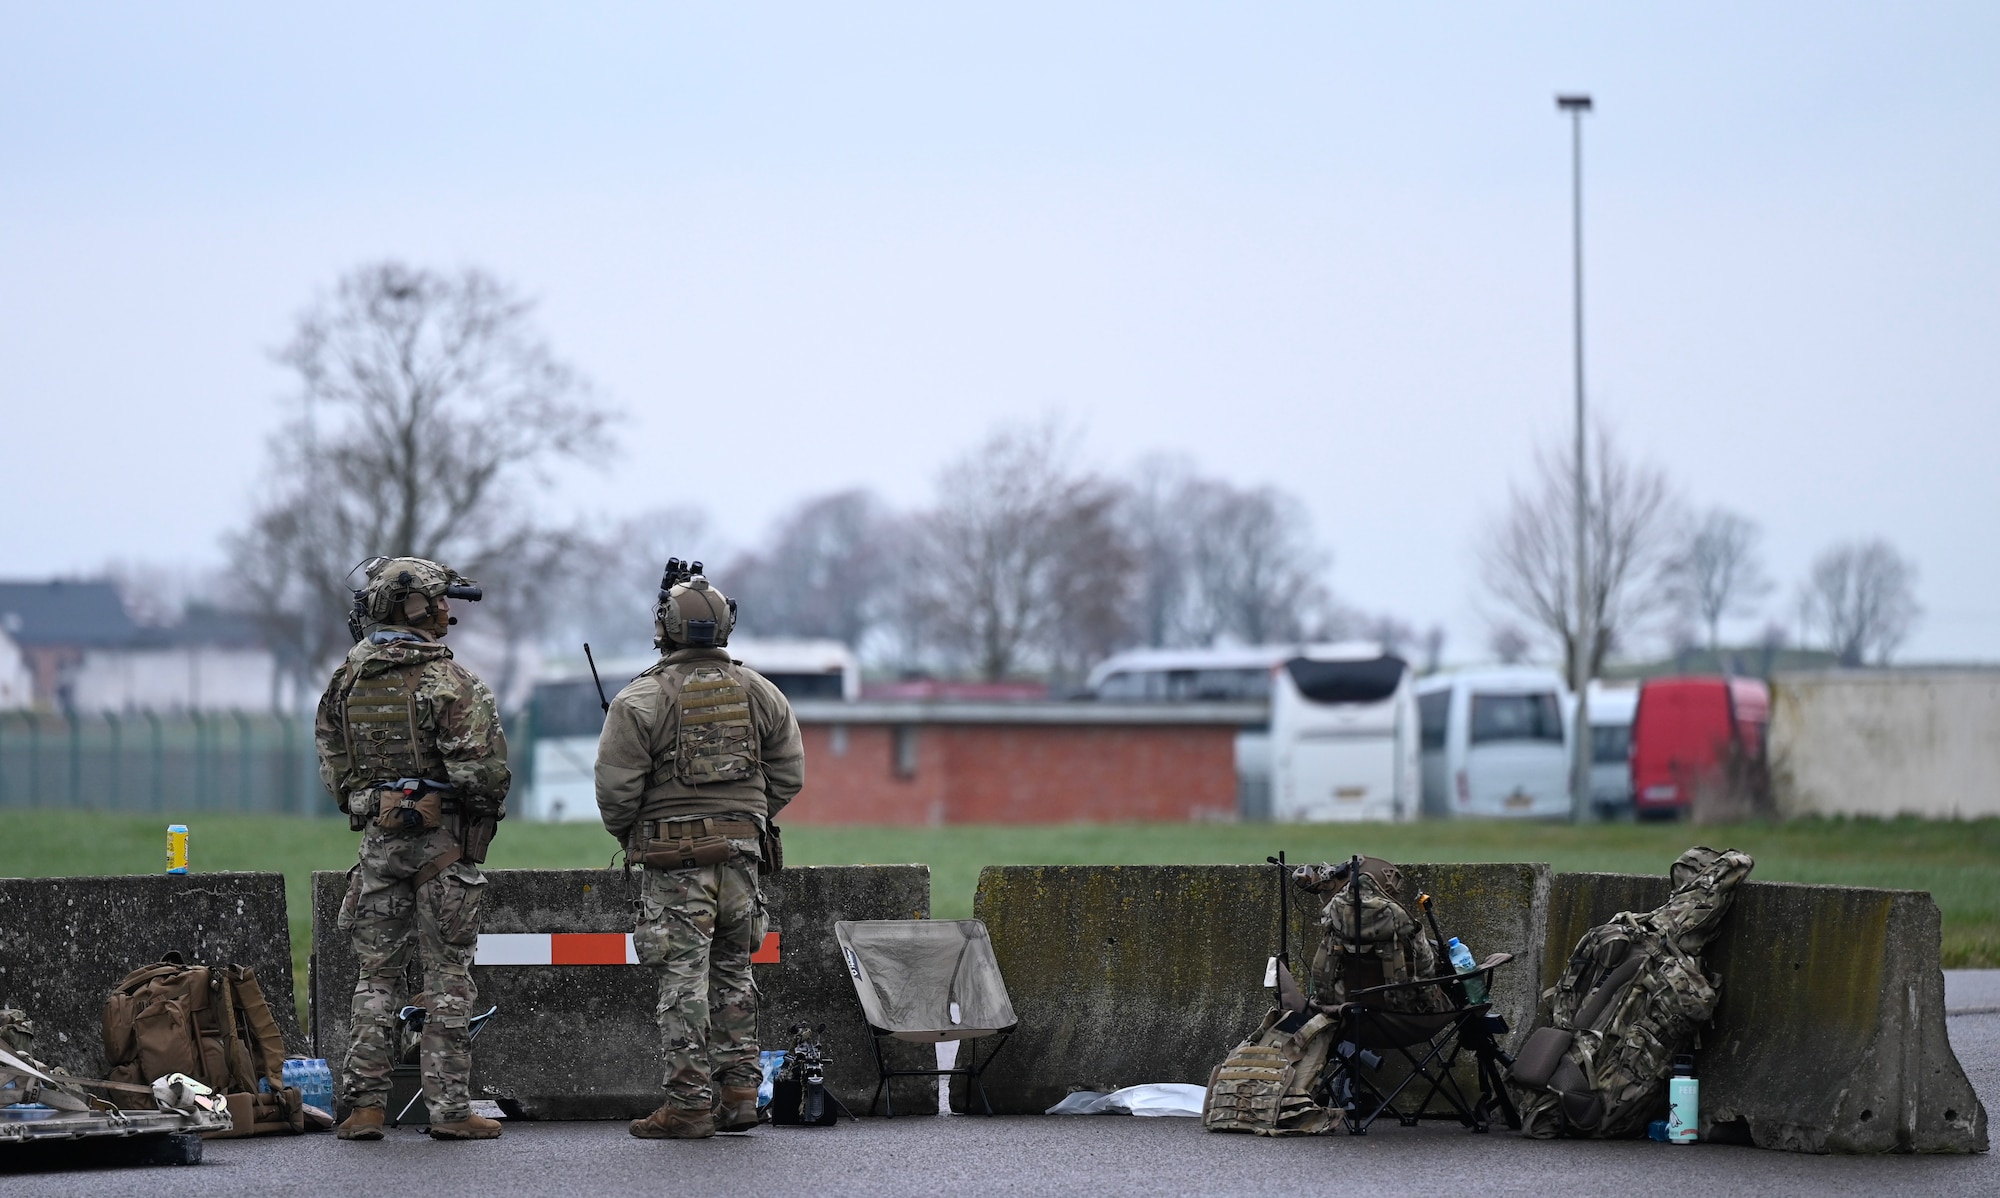 U.S. Air Force contingency response team members from the 435th Security Forces Squadron man a security checkpoint at Chièvres Airfield in Belgium, during Exercise Agile Bison 23-1, March 7, 2023. By executing the exercise, the 435th Contingency Response Group trained to establish an expeditionary airfield using NATO allies and partner bases along with the CRGs own personnel, logistics and equipment; all while maintaining force protection during high threat levels.